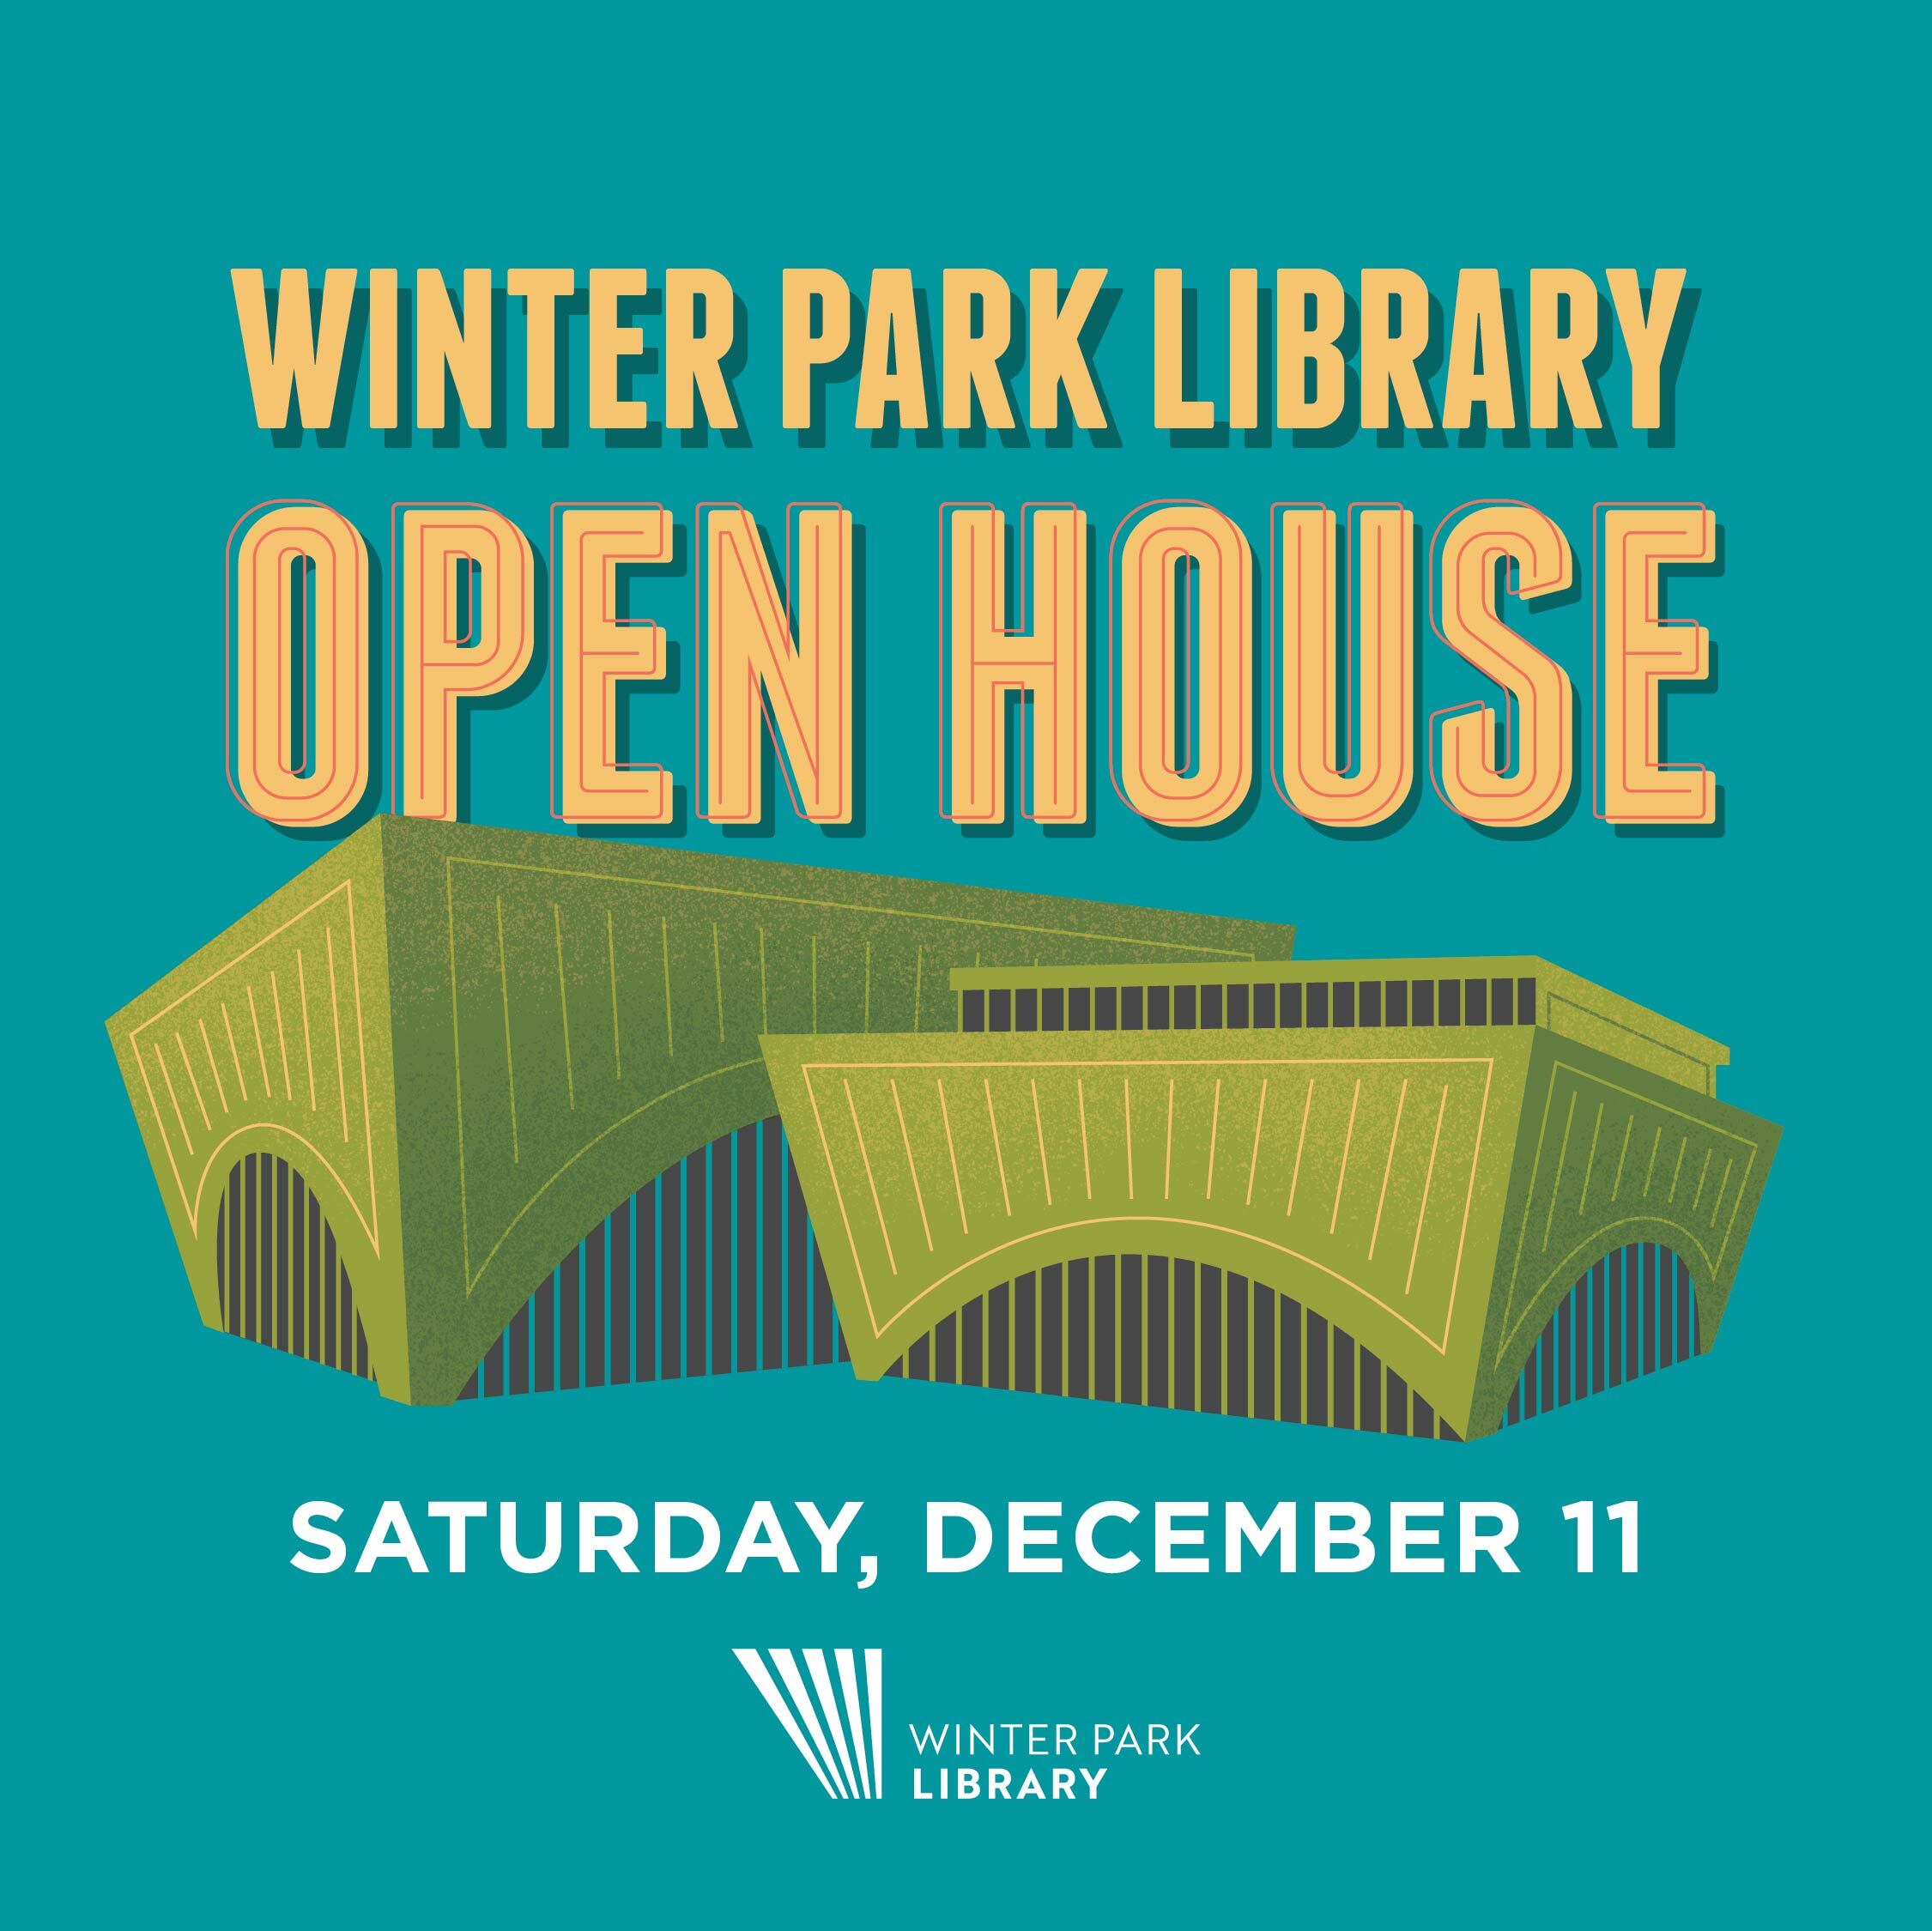 Winter Park Library Open House: Saturday, December 11